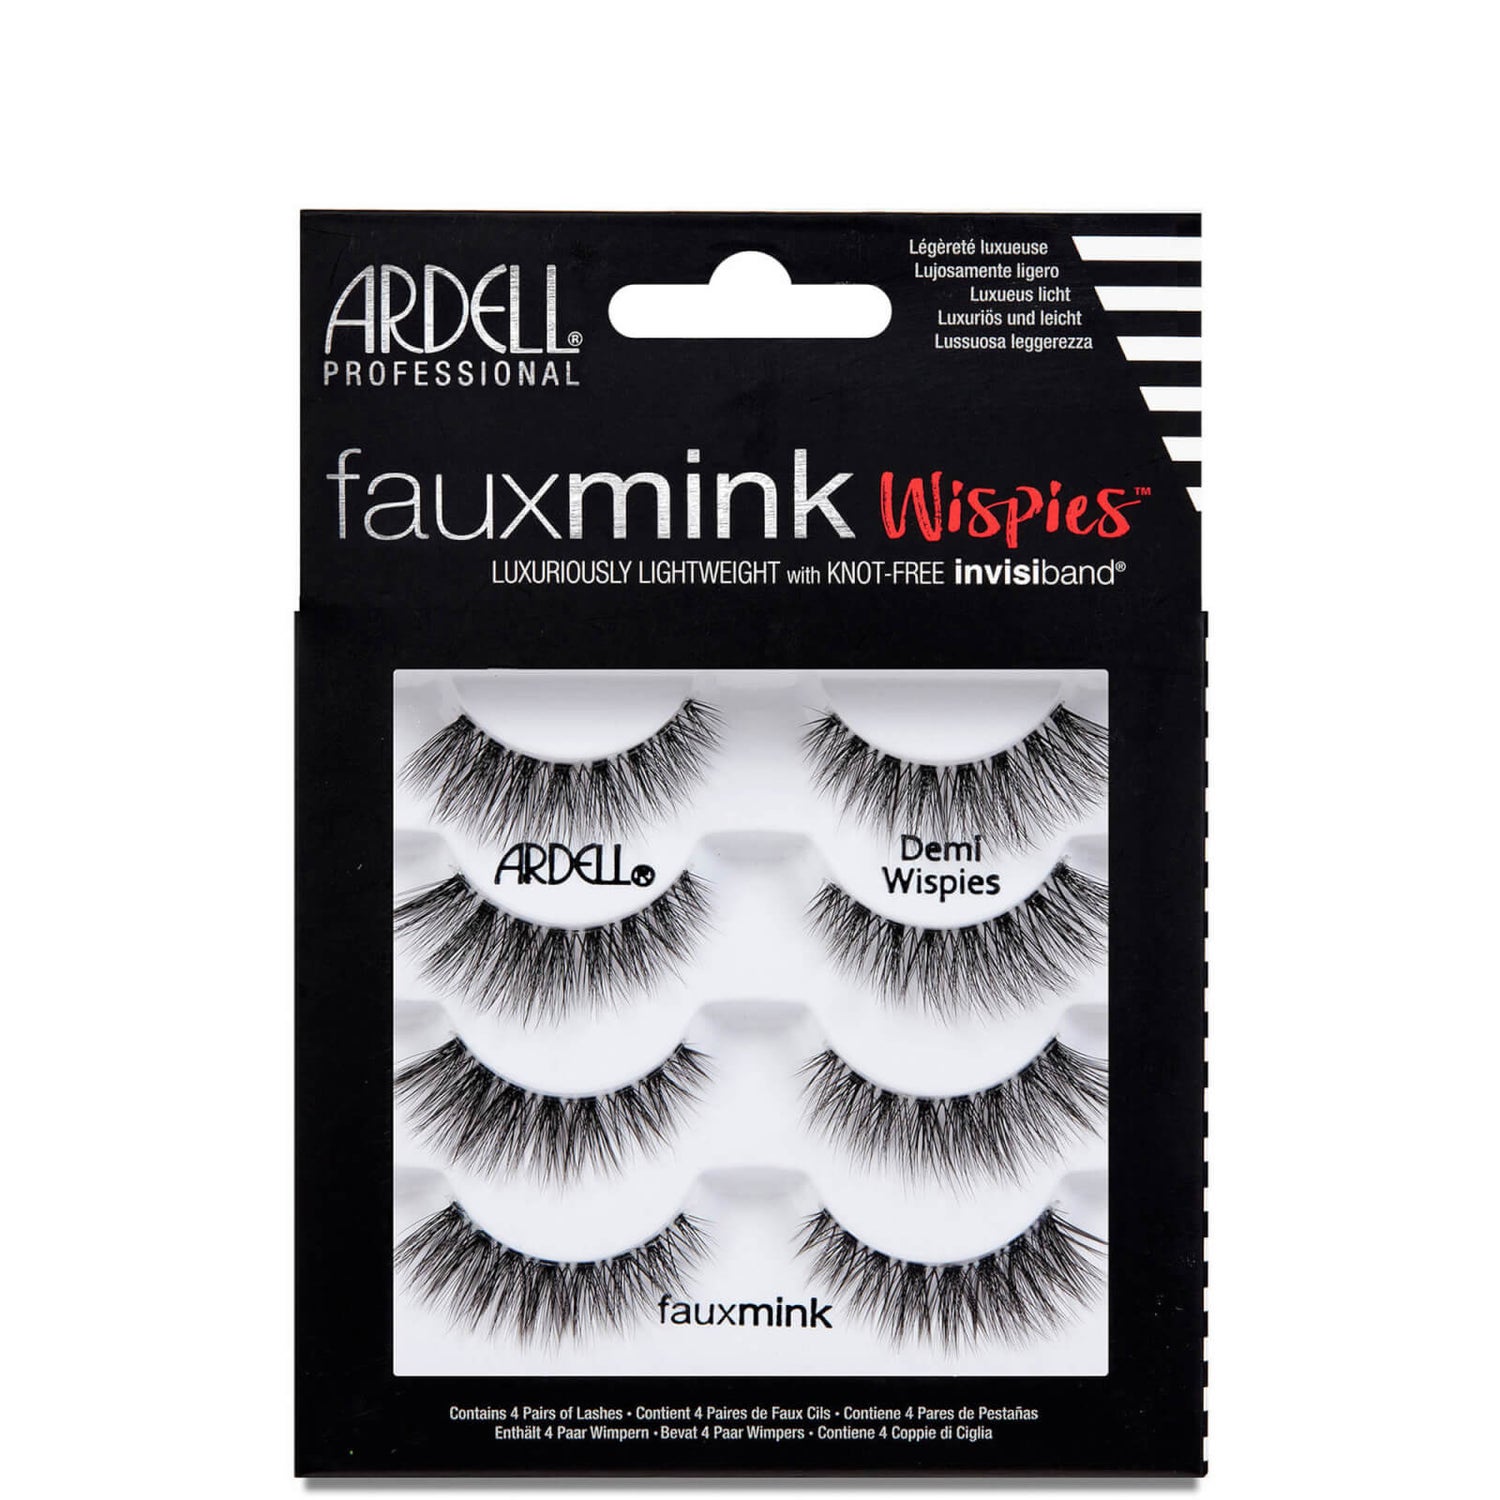 Ardell Faux Mink Demi Wispies Multipack (4 Pack)